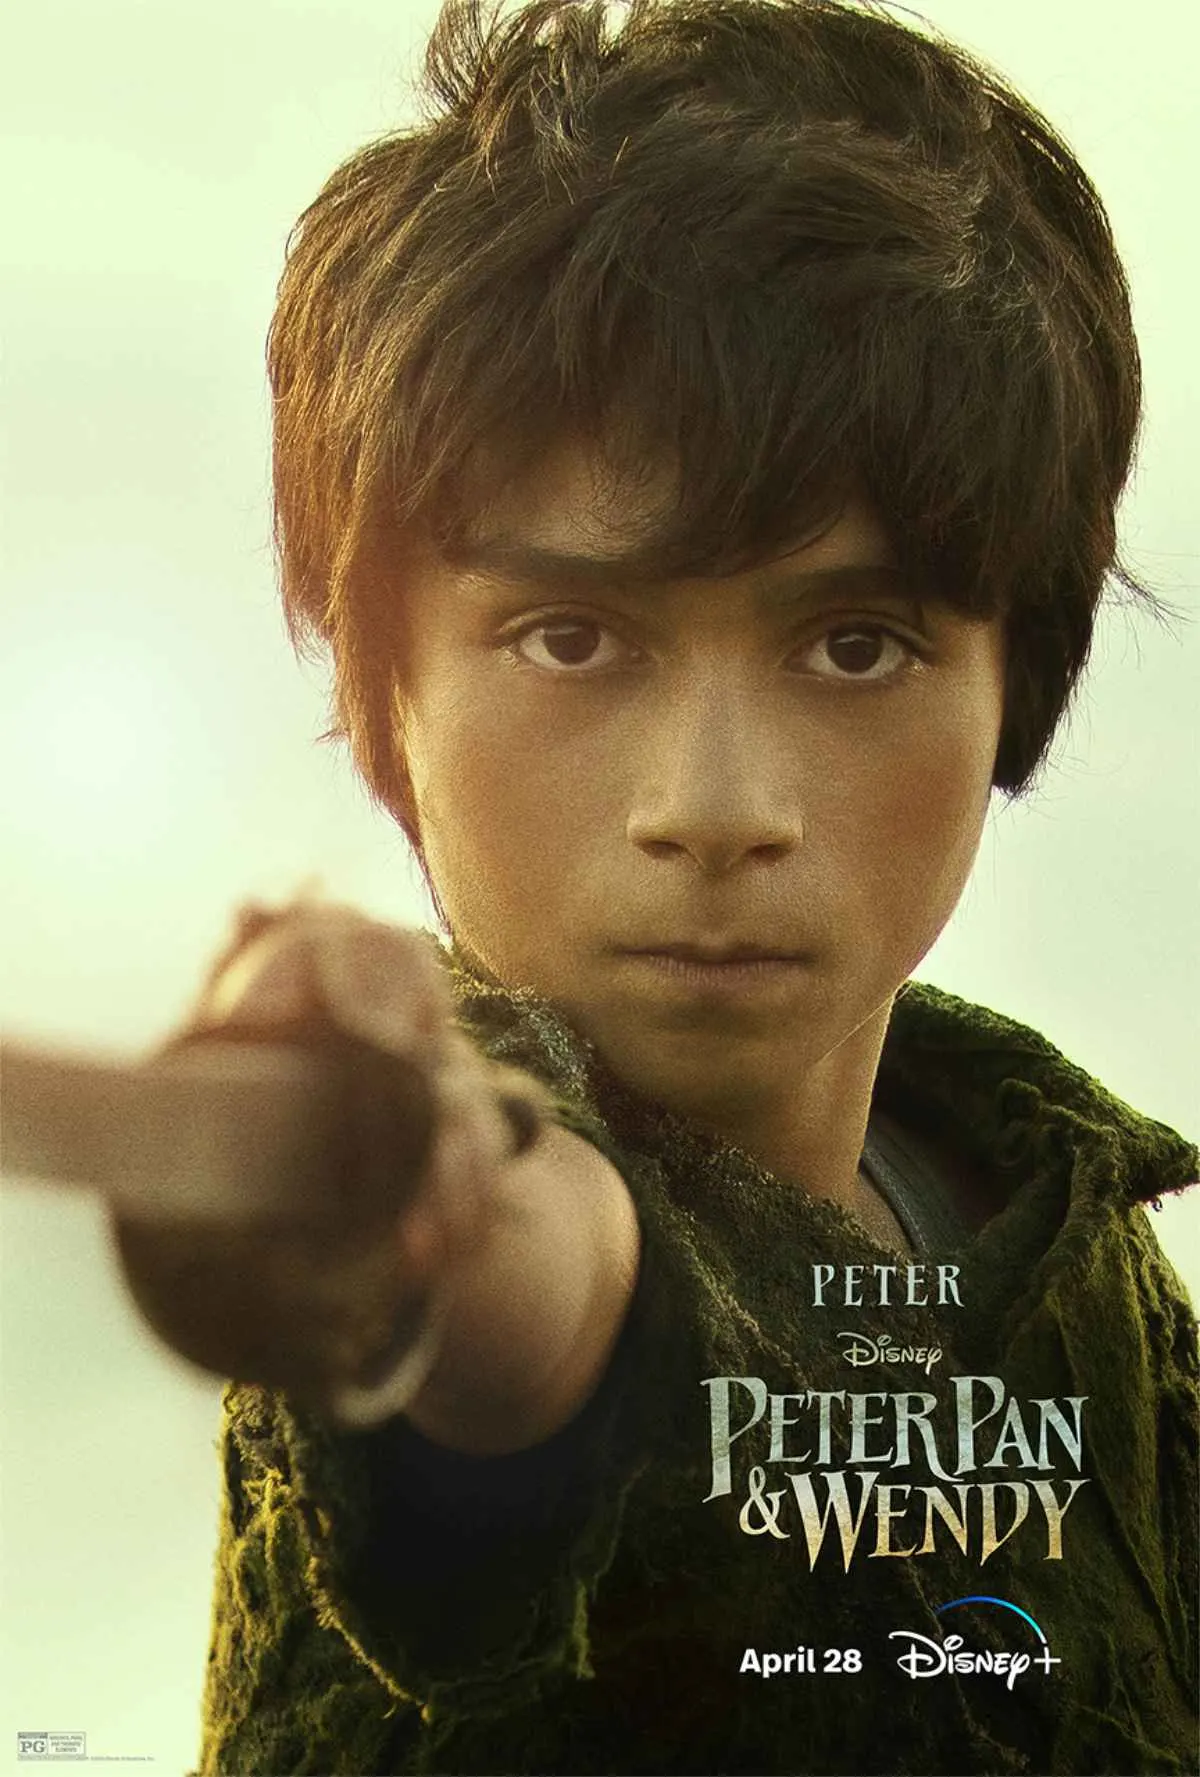 Peter Pan & Wendy Character Posters Revealed